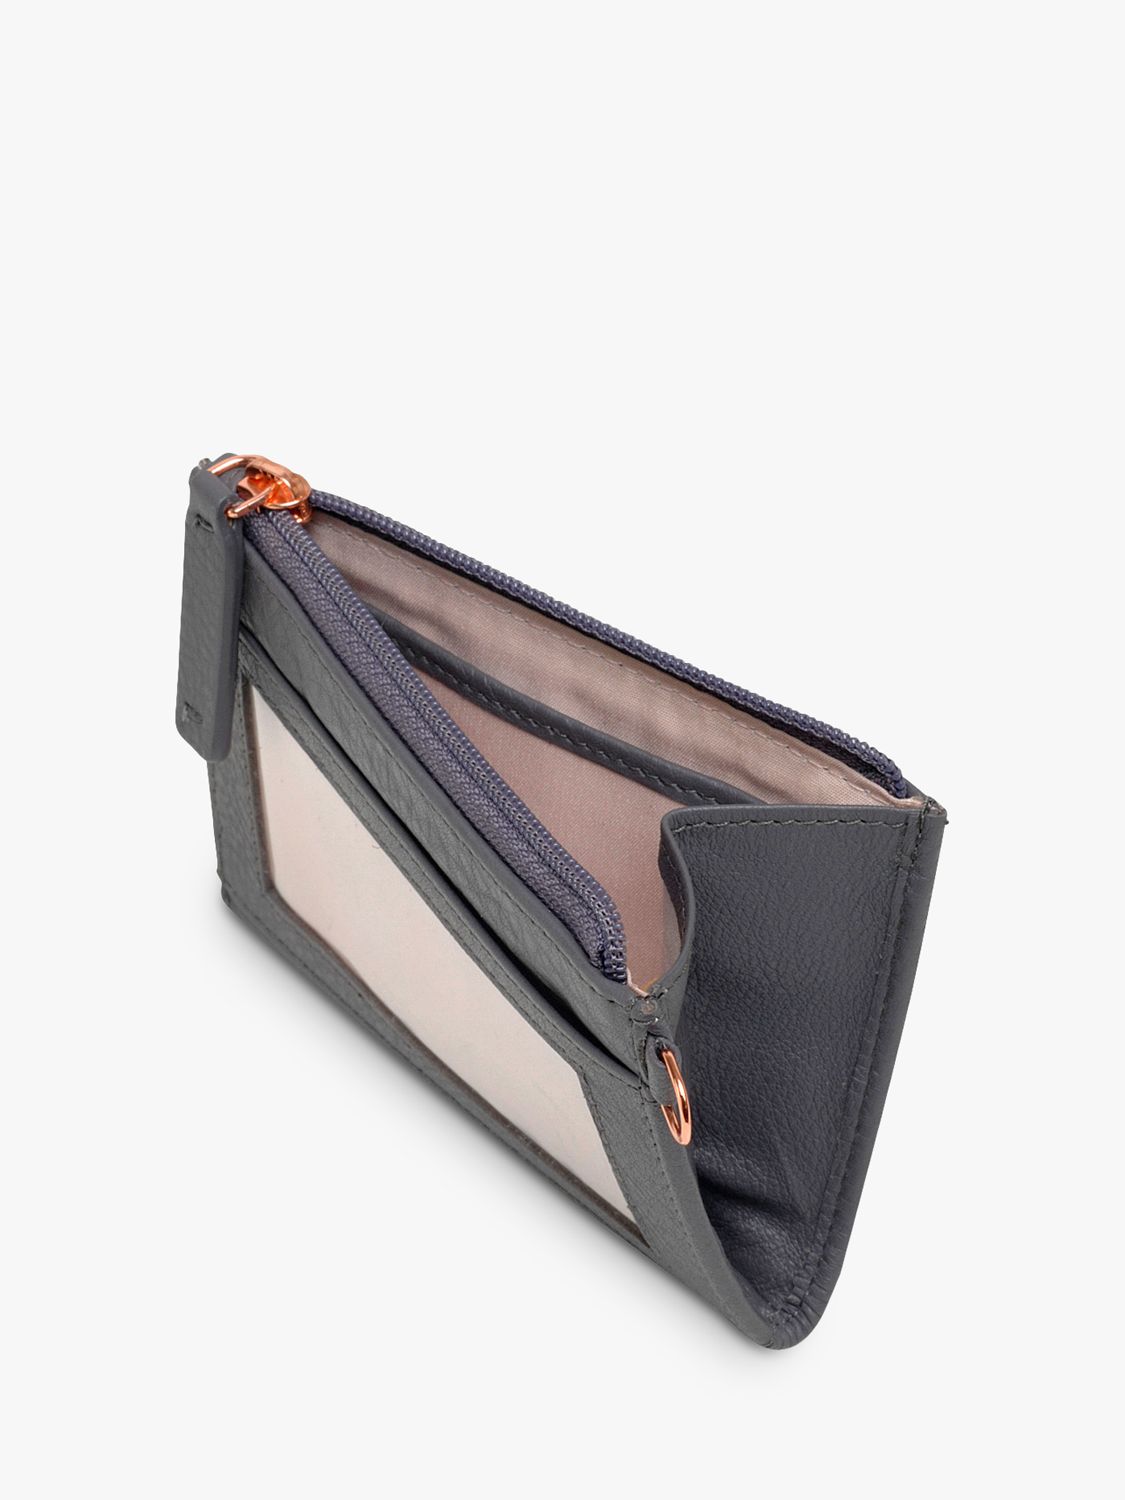 Radley Pockets Leather Small Coin Purse, Charcoal at John Lewis & Partners